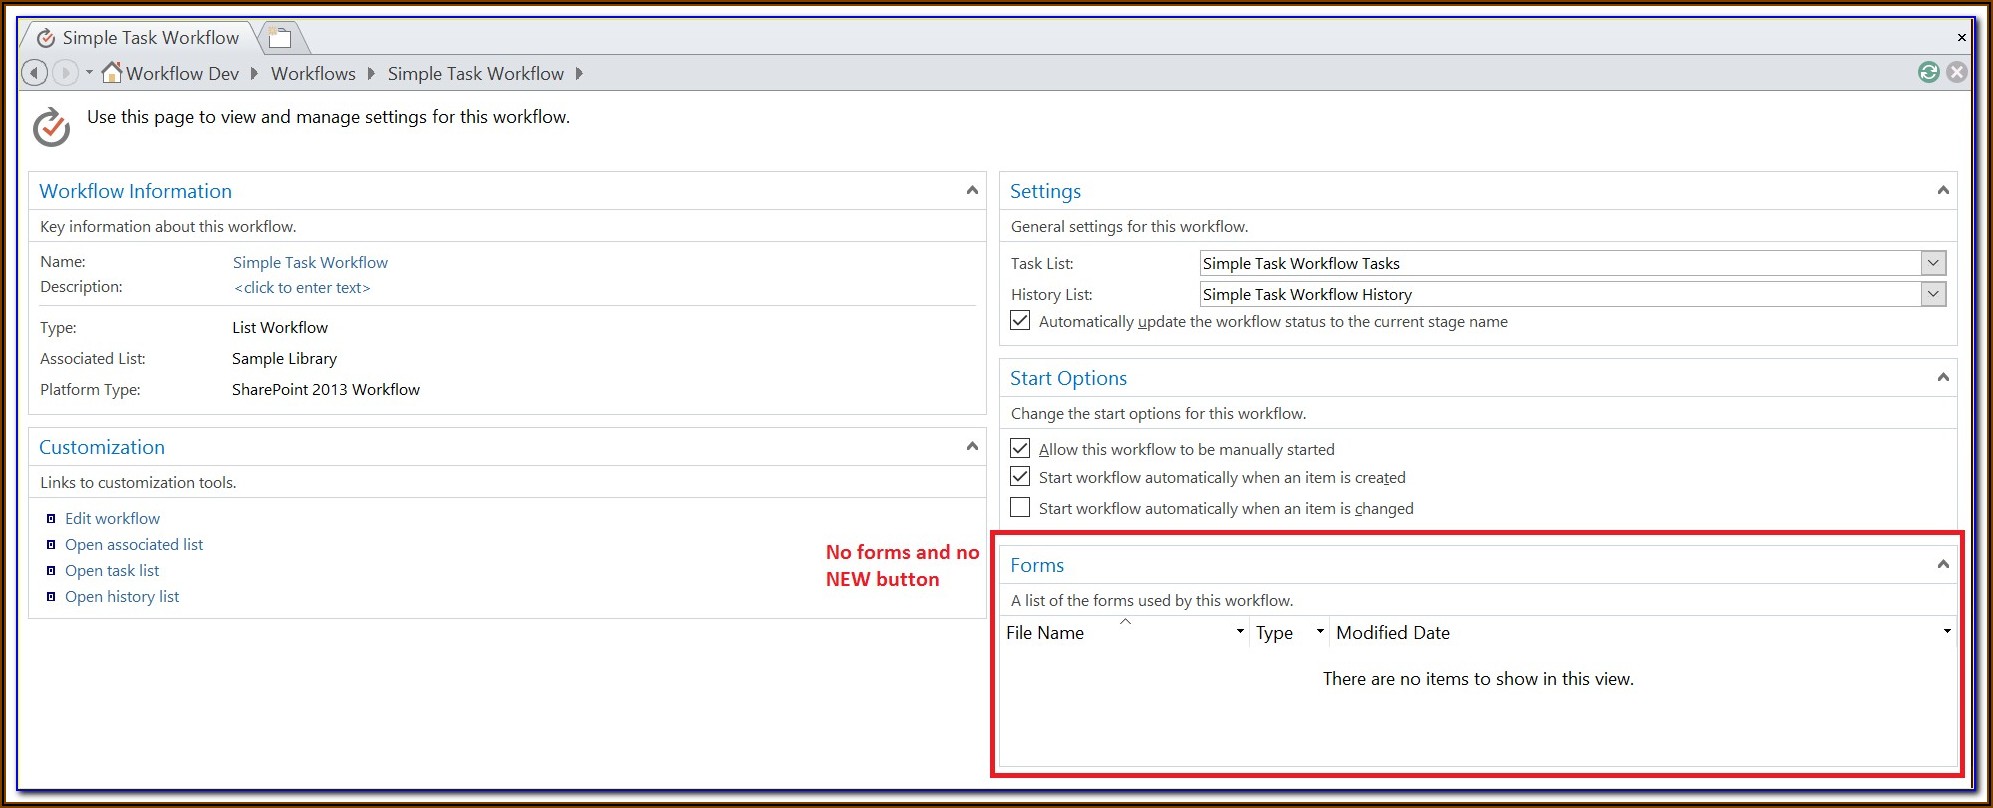 How To Create Nintex Form In Sharepoint 2013